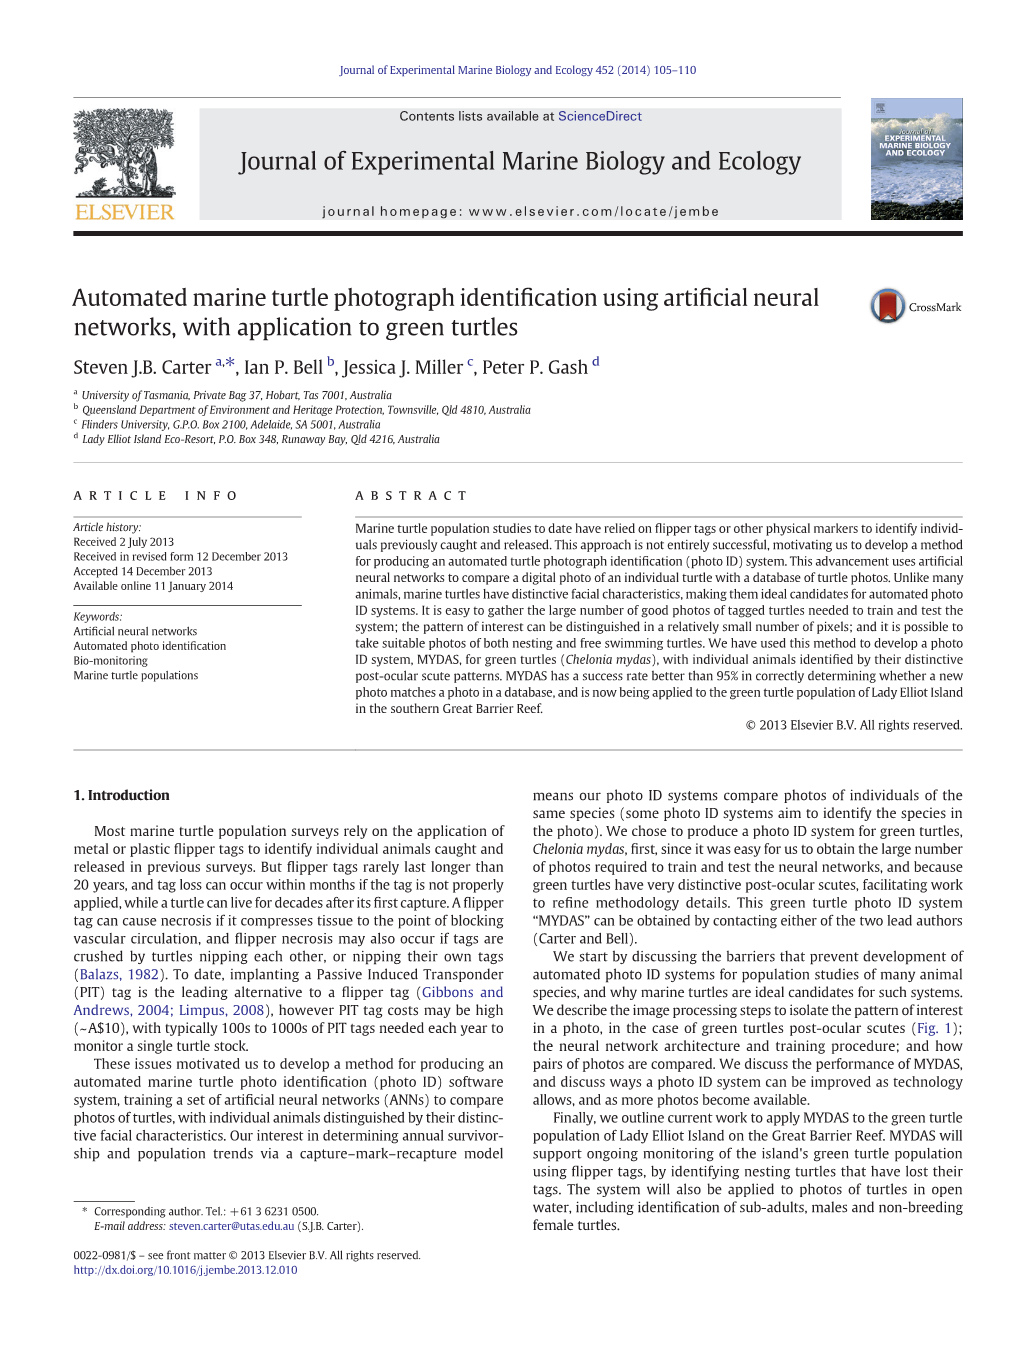 Automated Marine Turtle Photograph Identification Using Artificial Neural